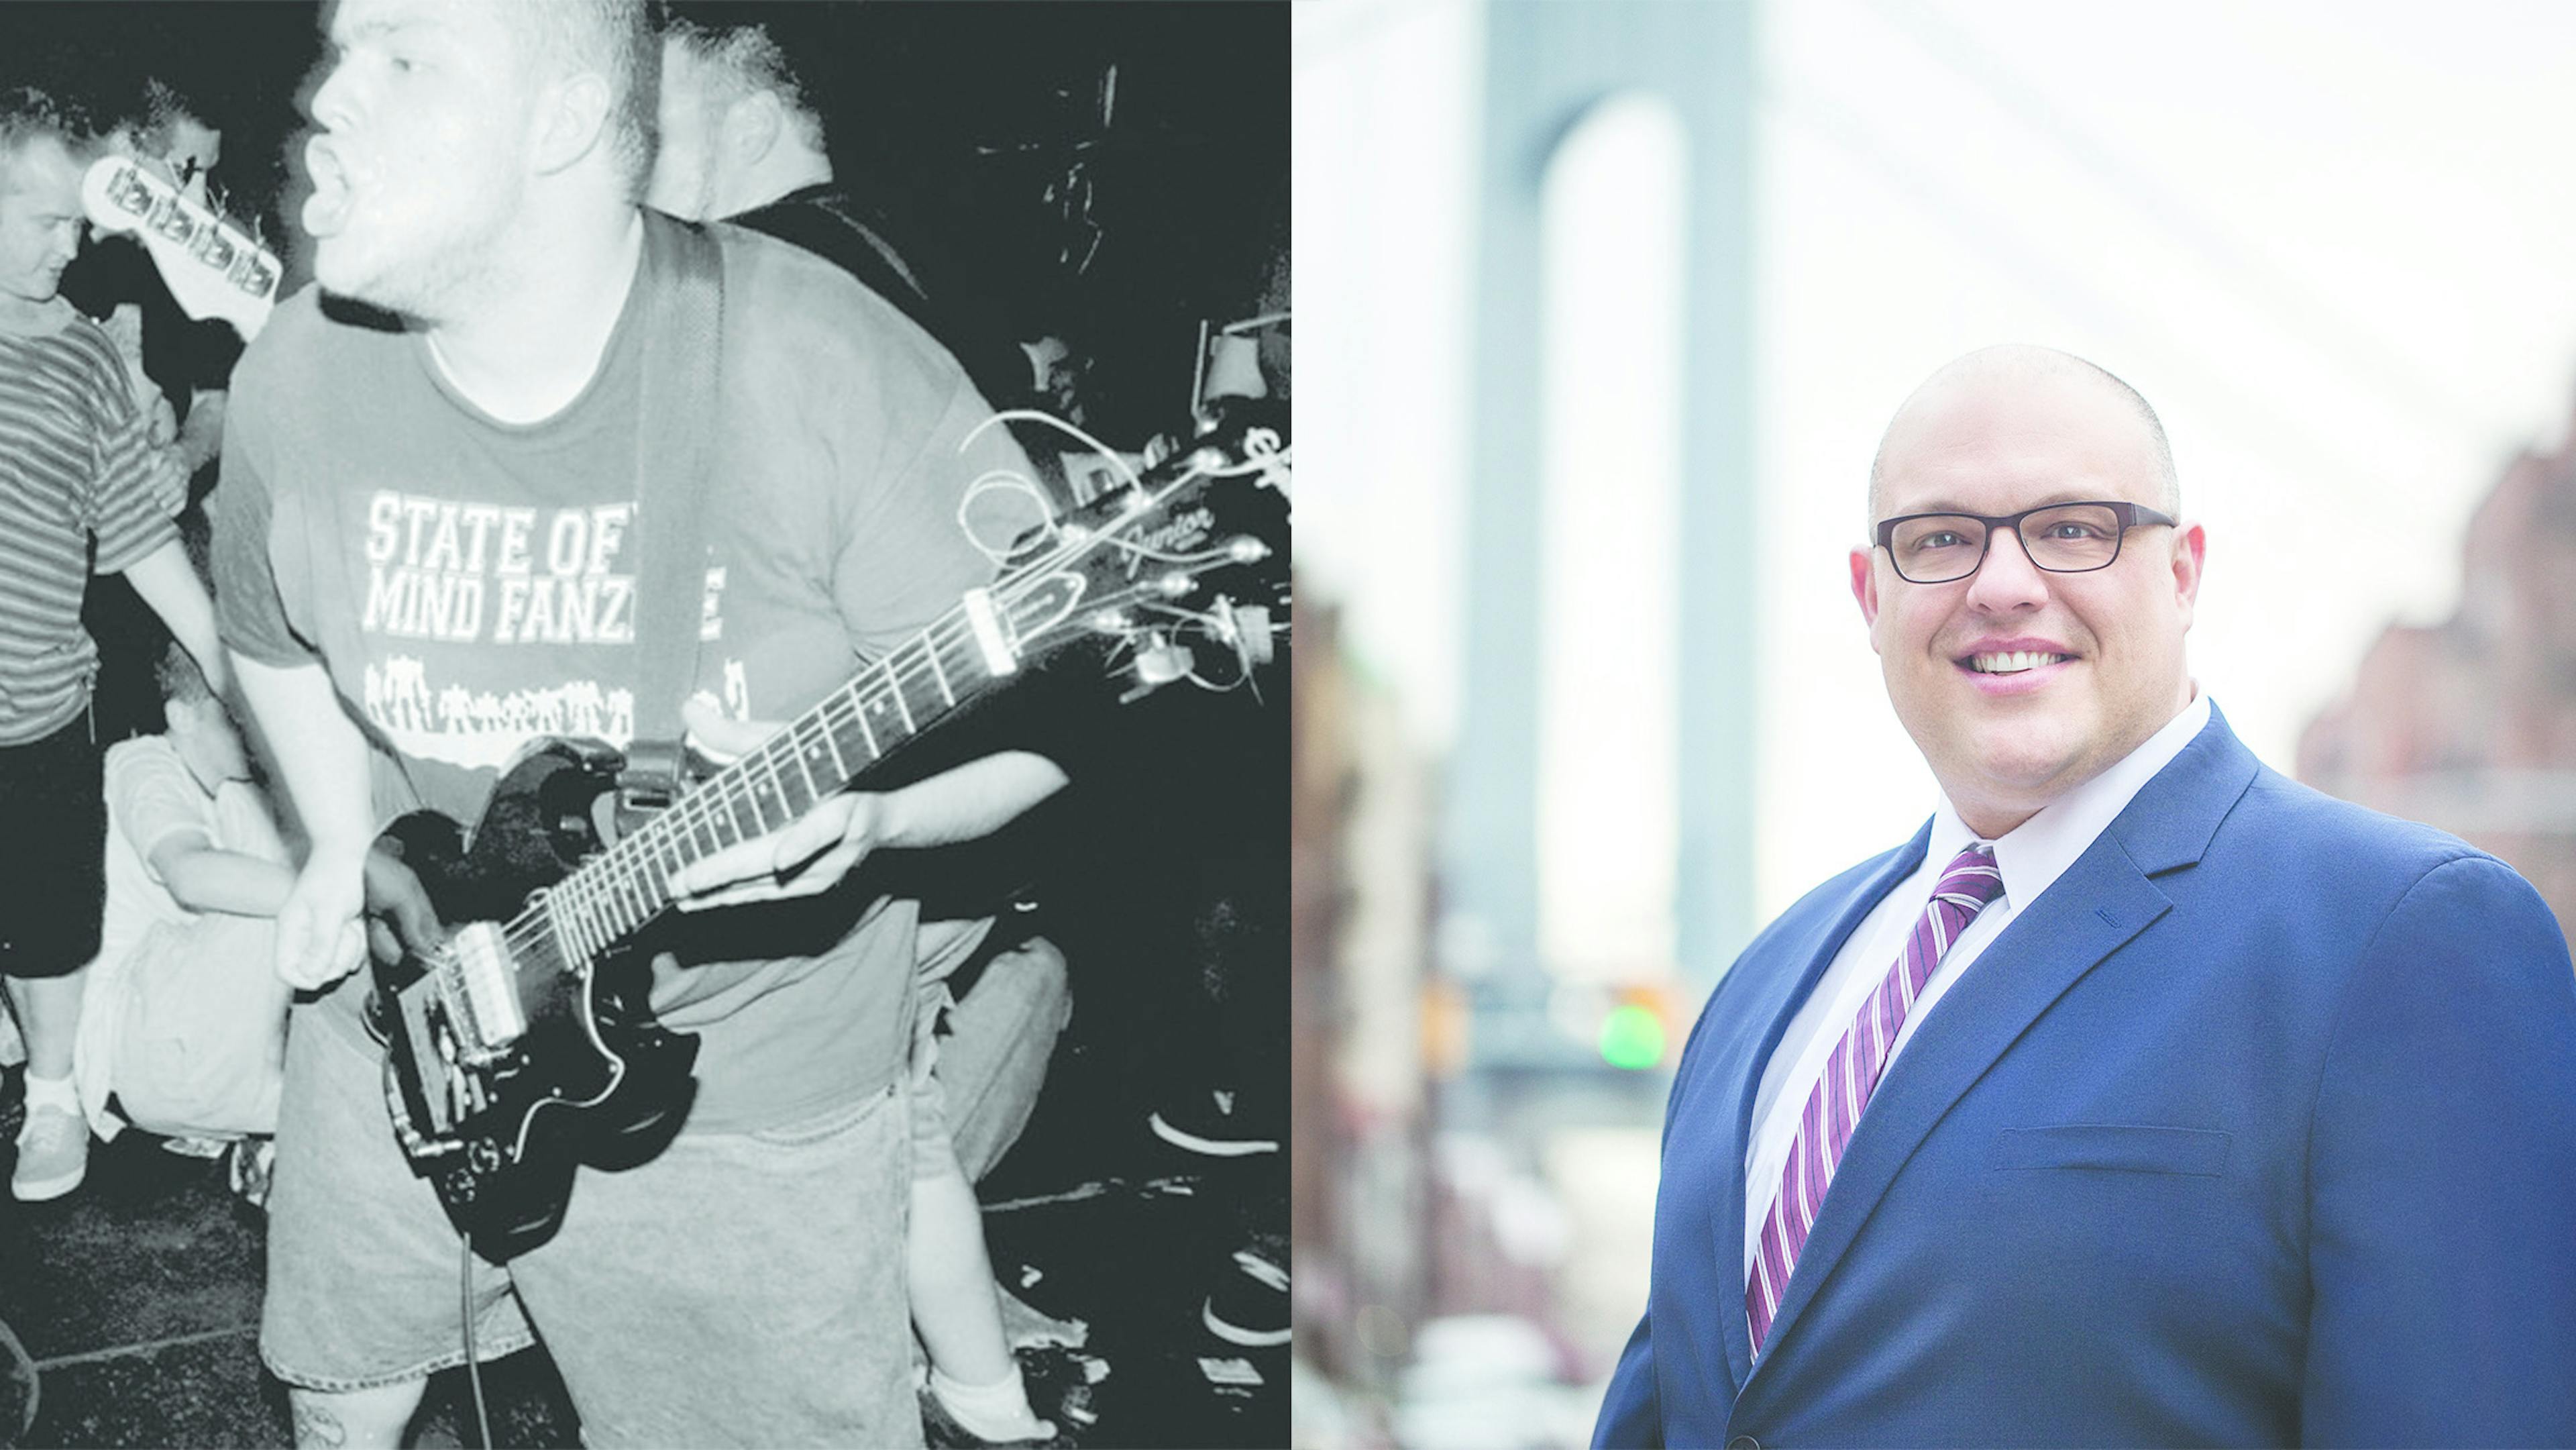 NYHC Stalwart Justin Brannan Got Elected To The New York City Council